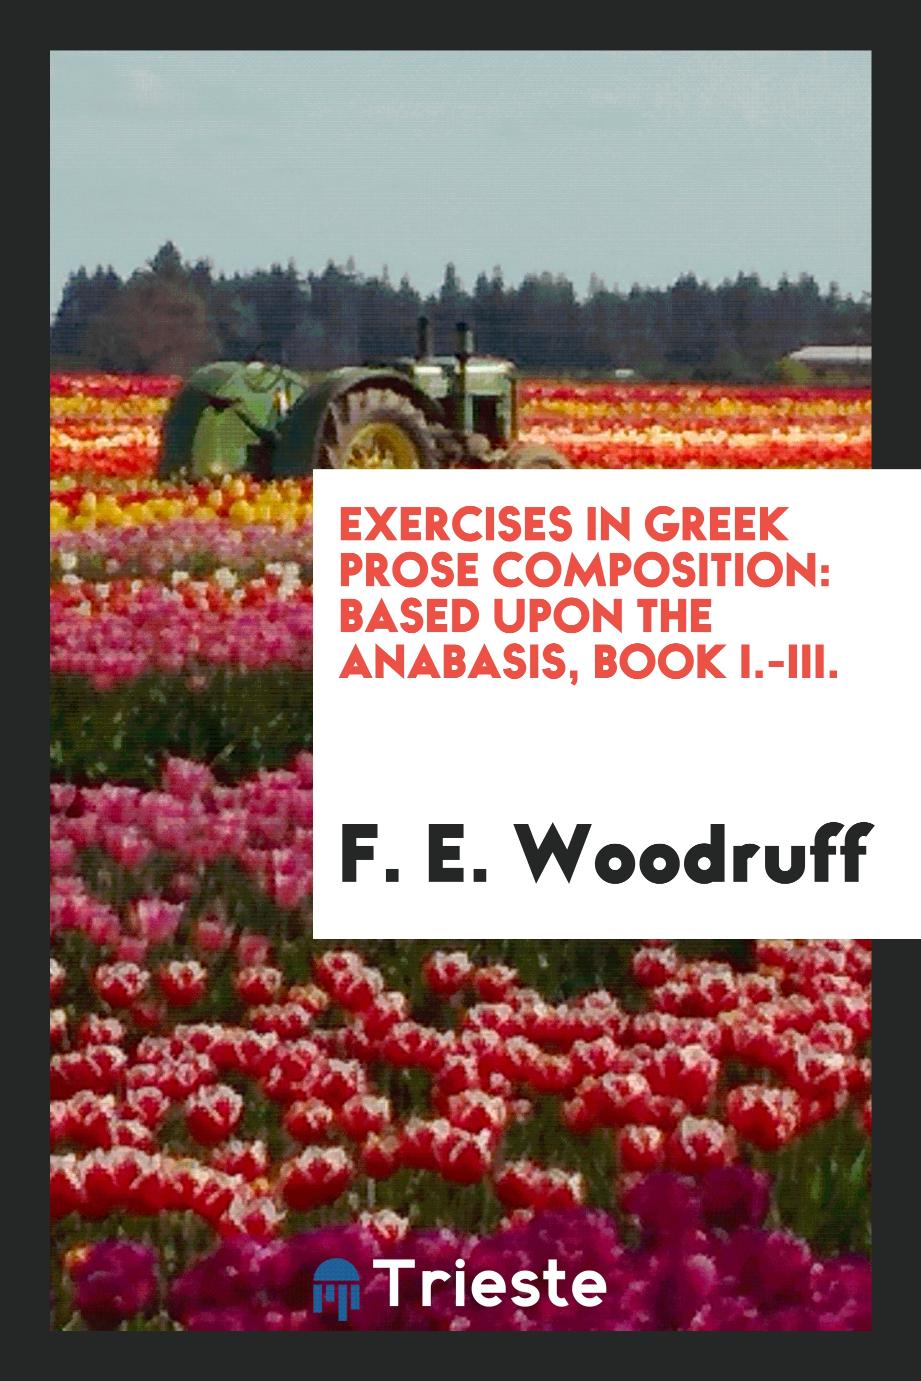 Exercises in Greek Prose Composition: Based upon the Anabasis, Book I.-III.